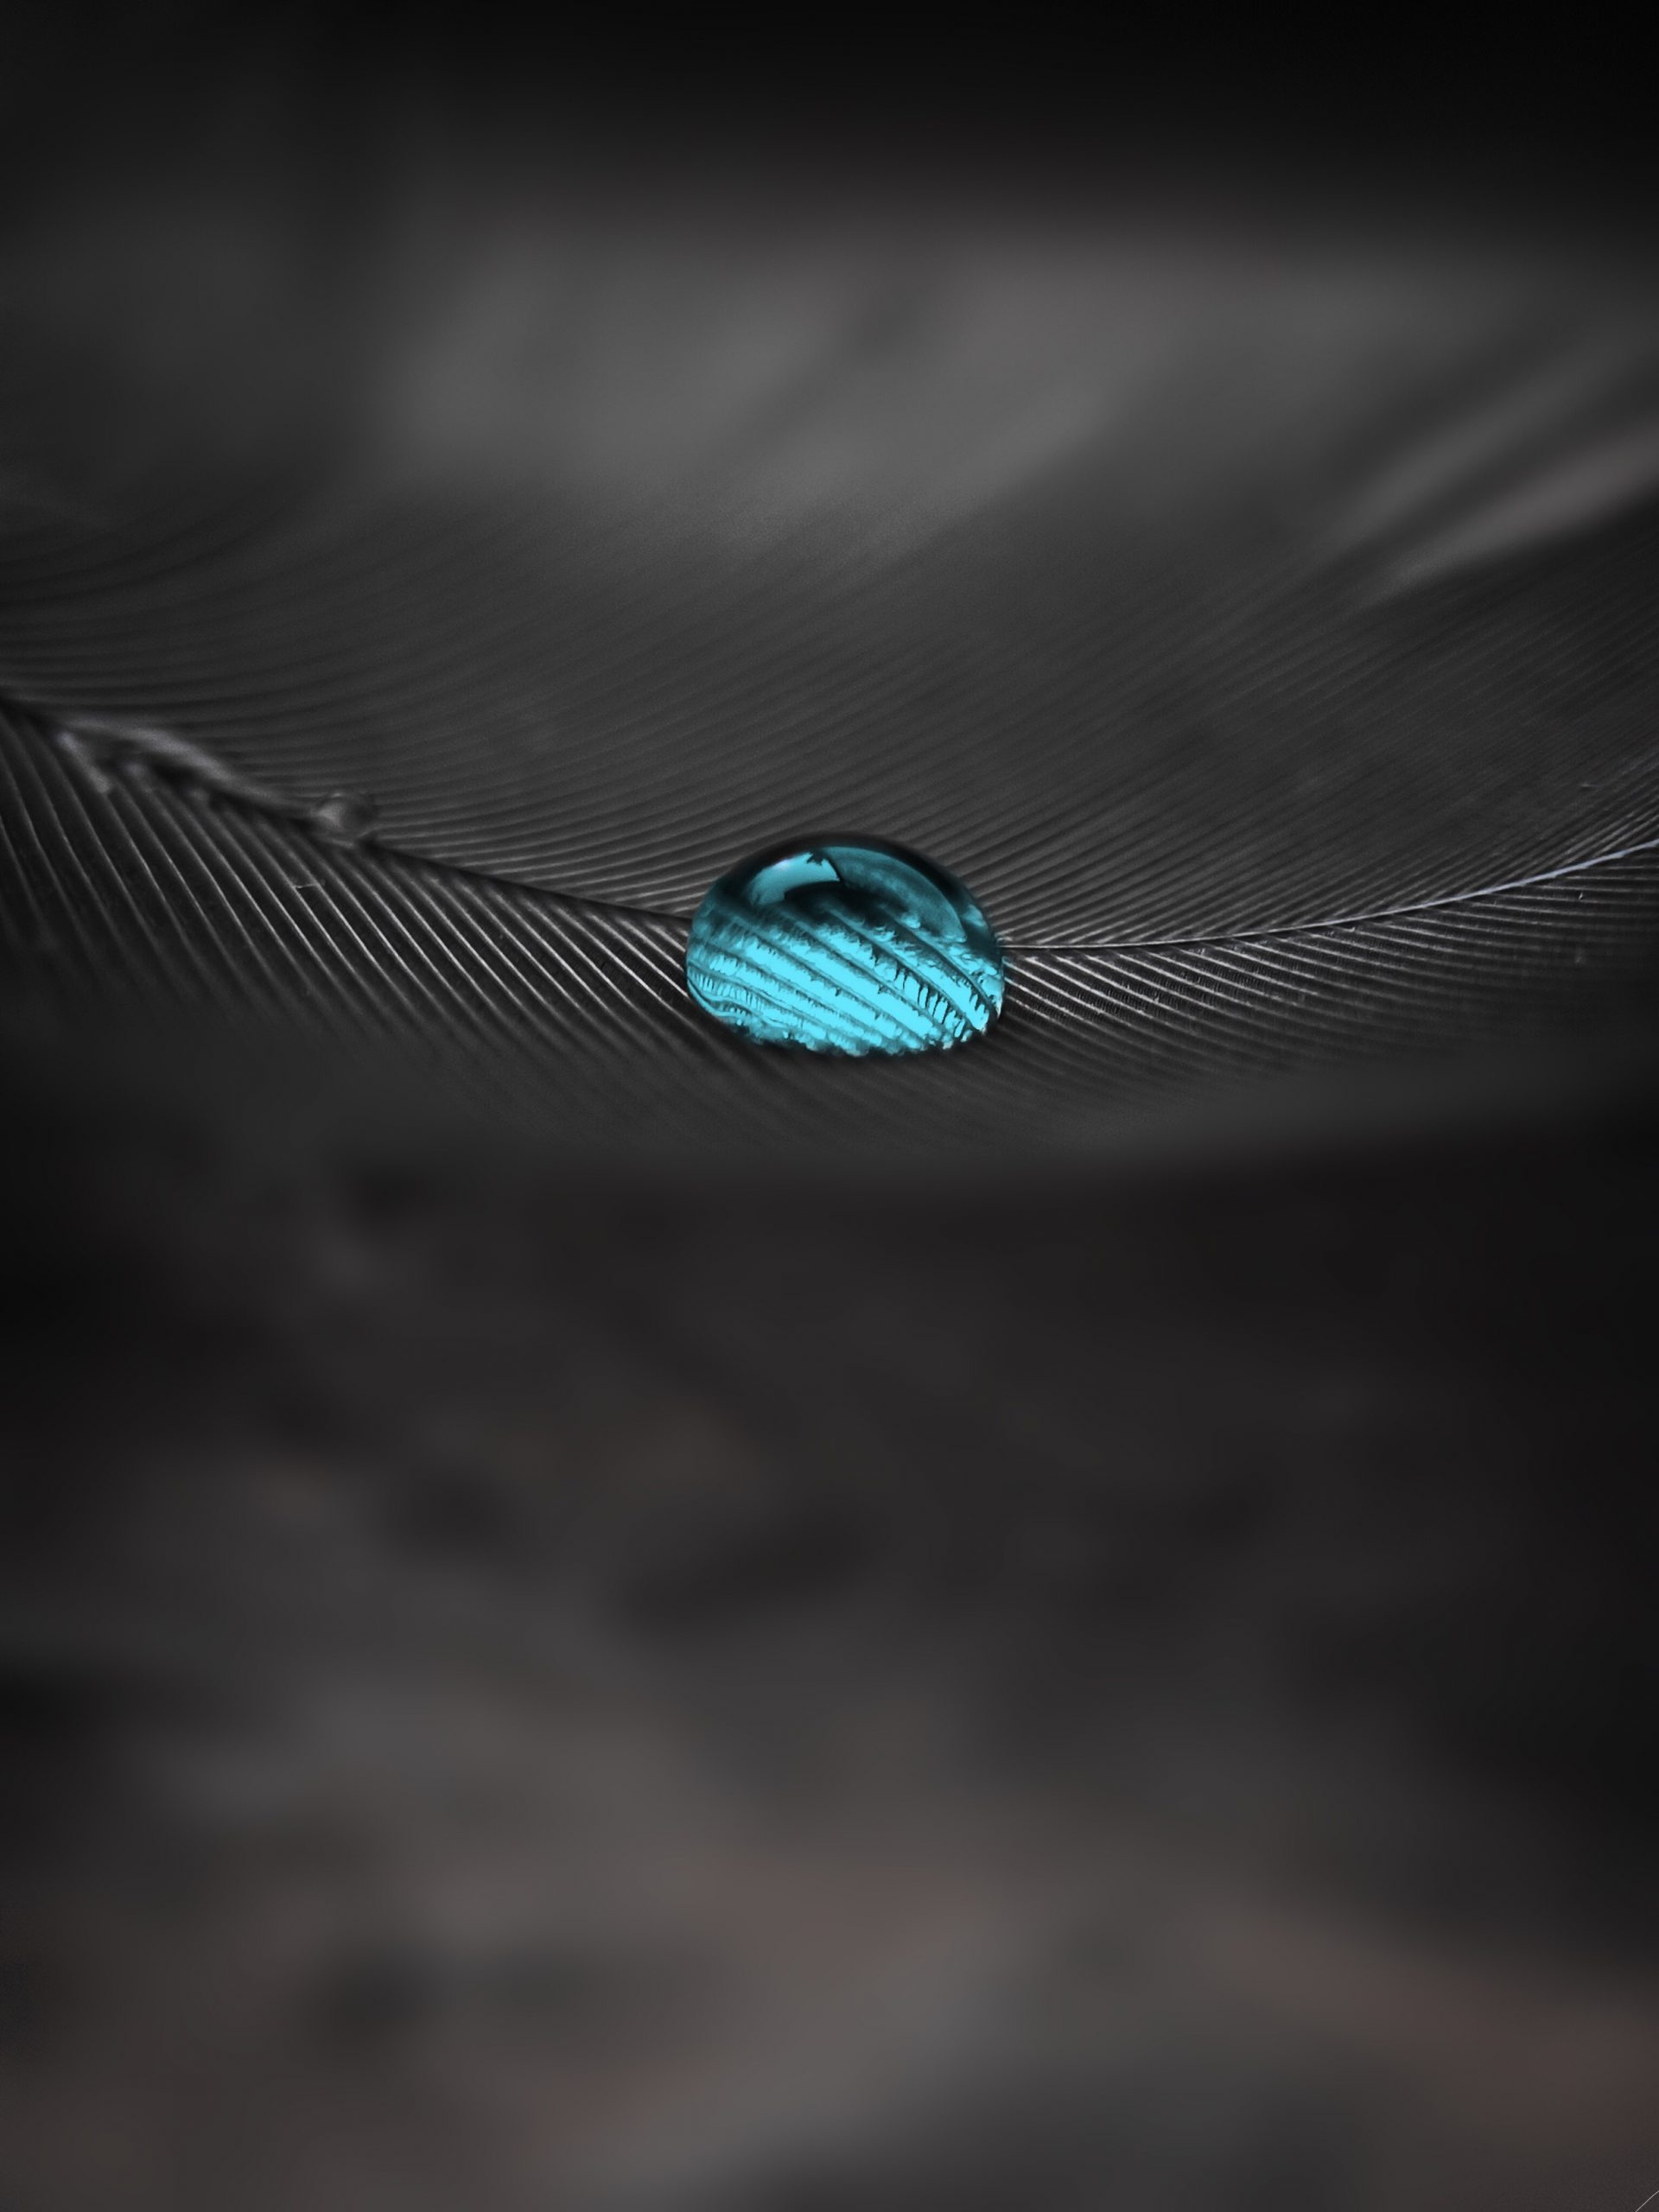 Drop on feather